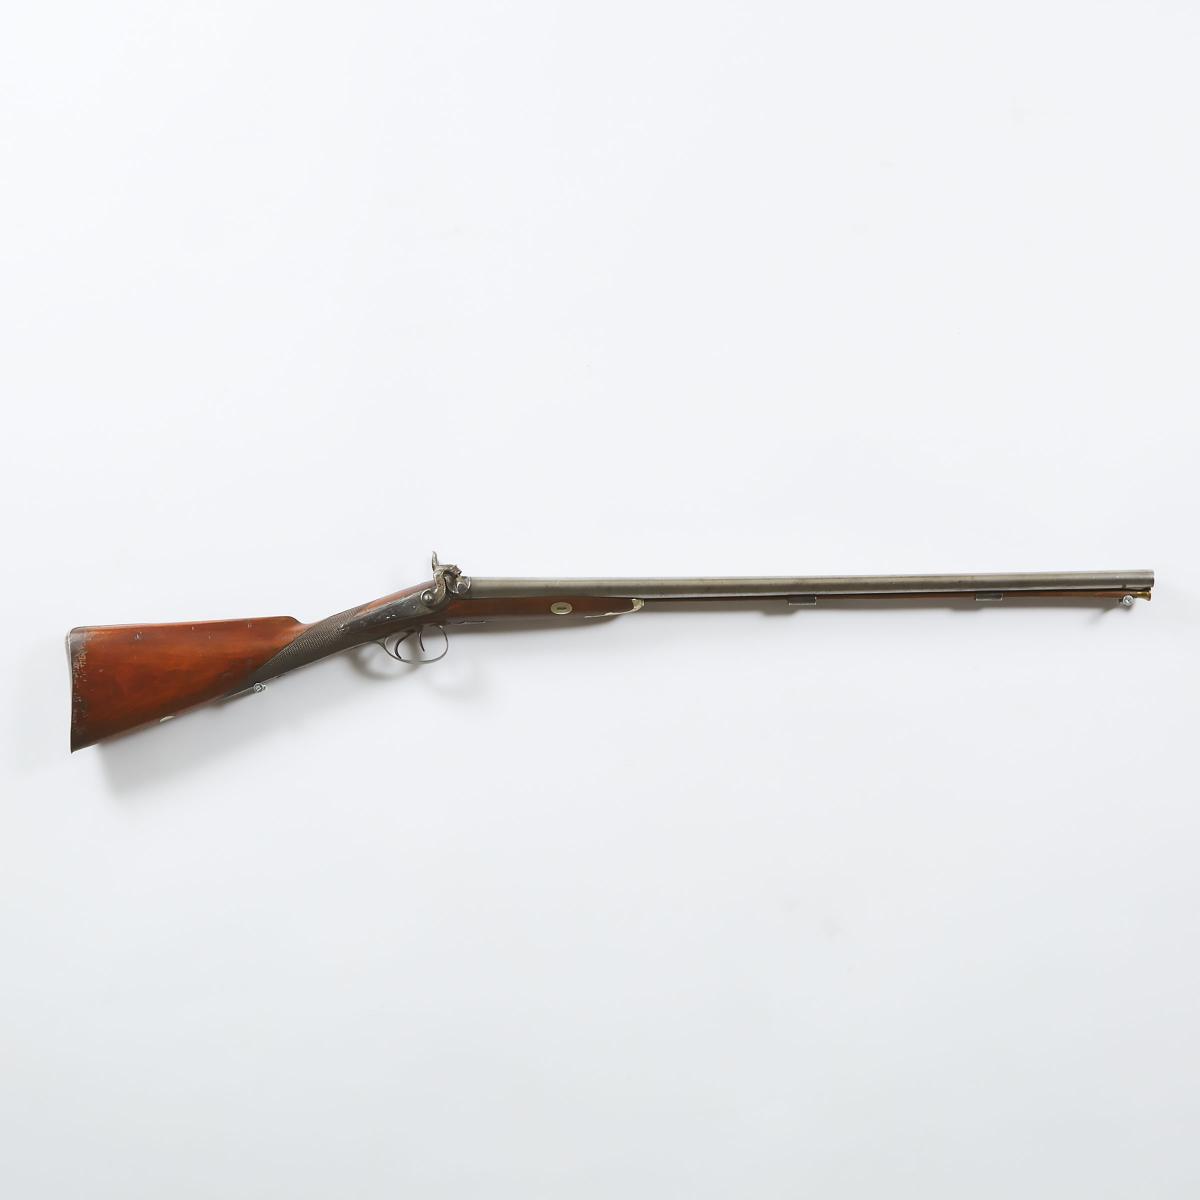 Large Bore Percussion Cap Double Fowling Gun by Egg of London, 19th century, length 46.2 in — 117.3